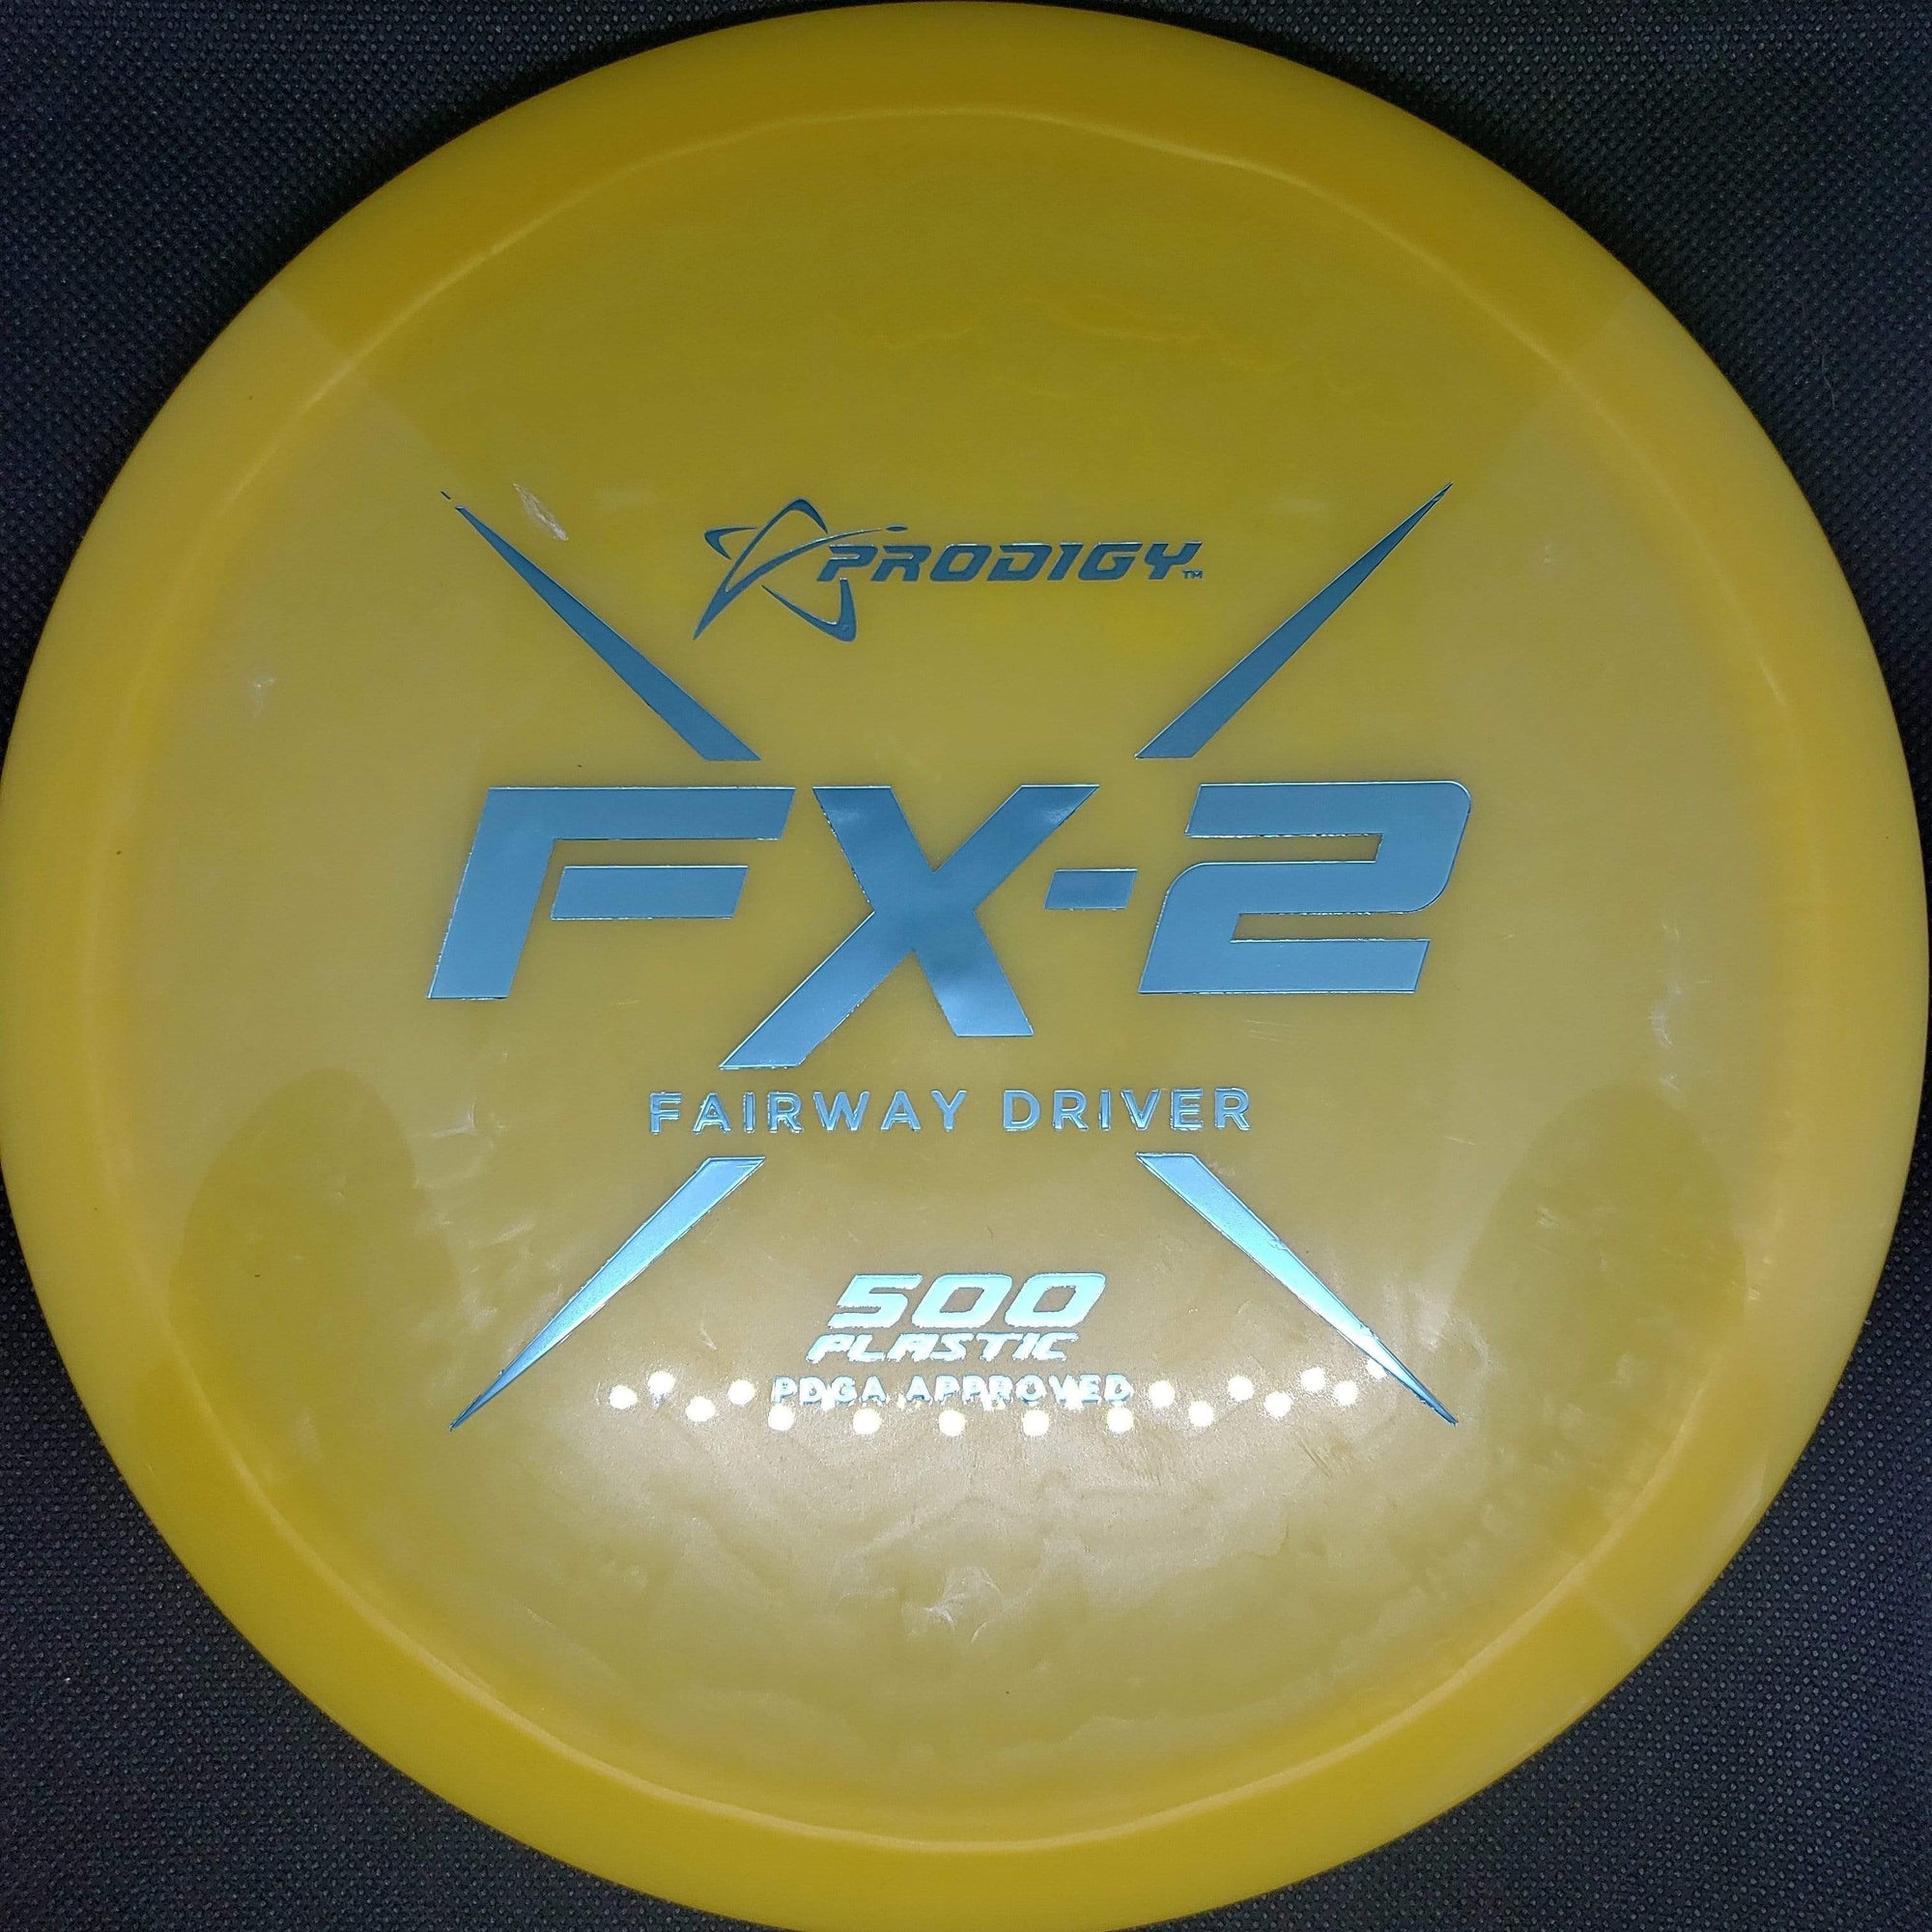 Prodigy Fairway Driver Yellow Teal Stamp 174g FX2 , 500 Plastic